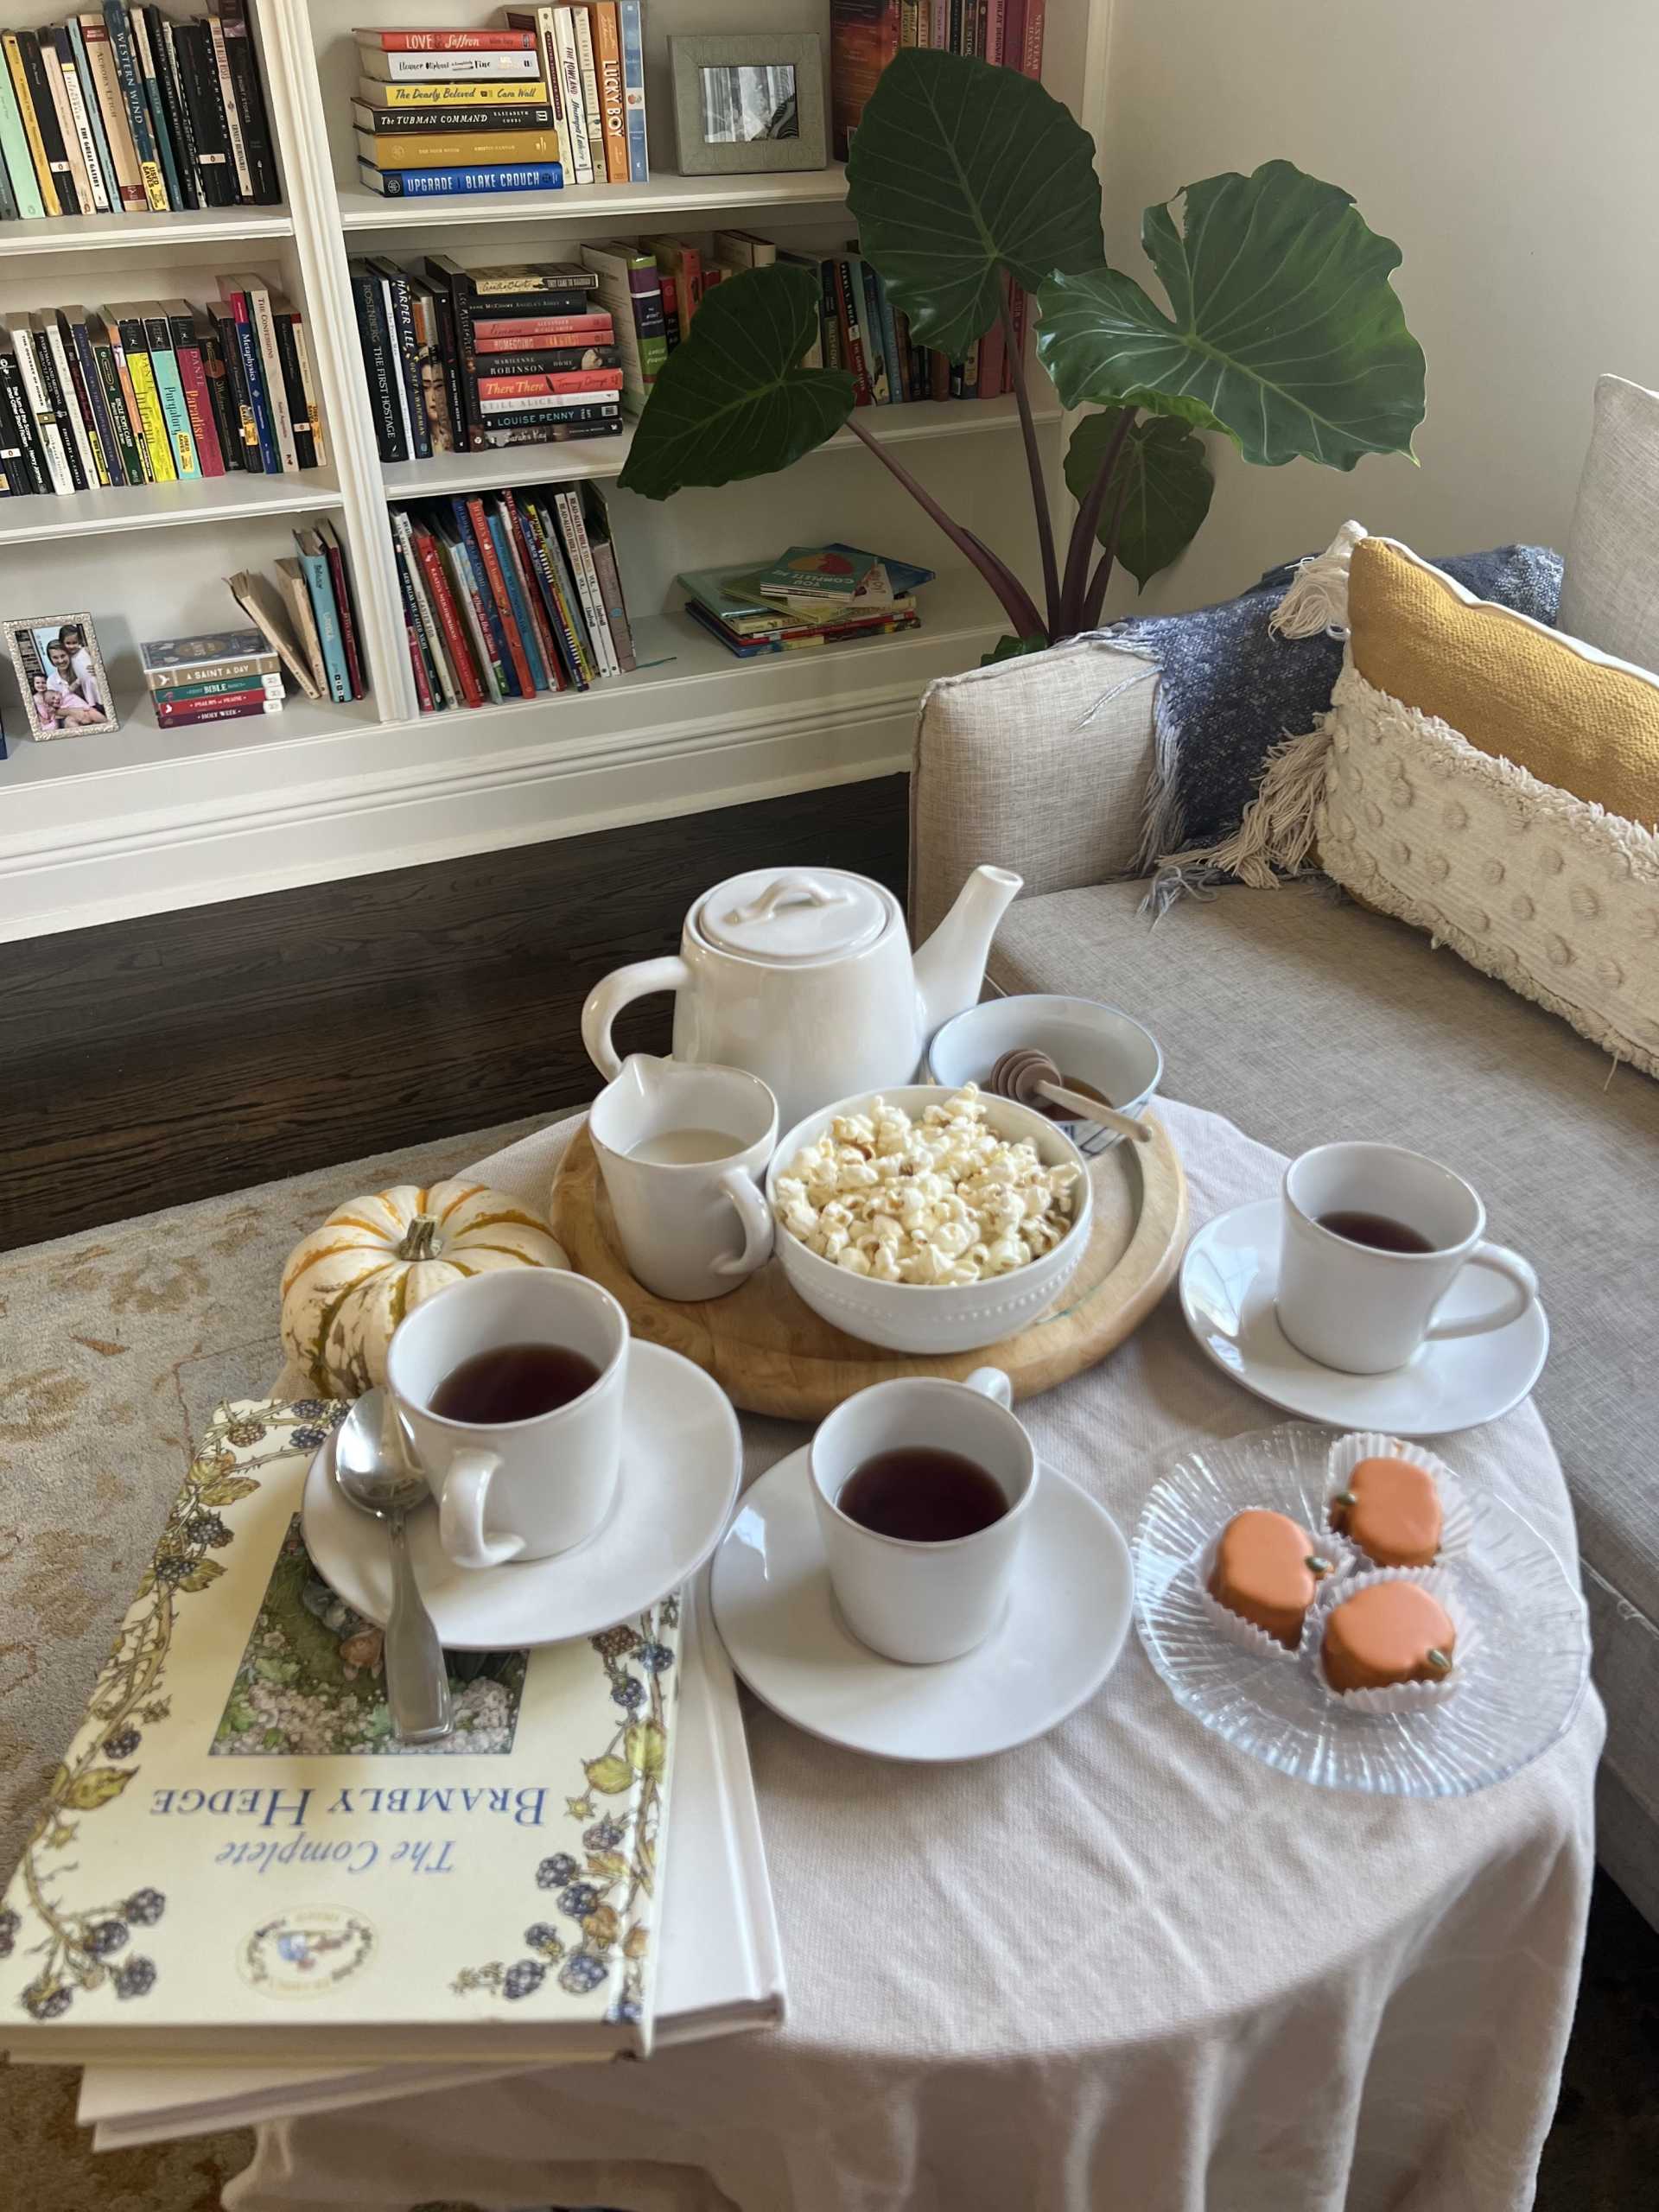 An afternoon poetry tea party with tea and treats.